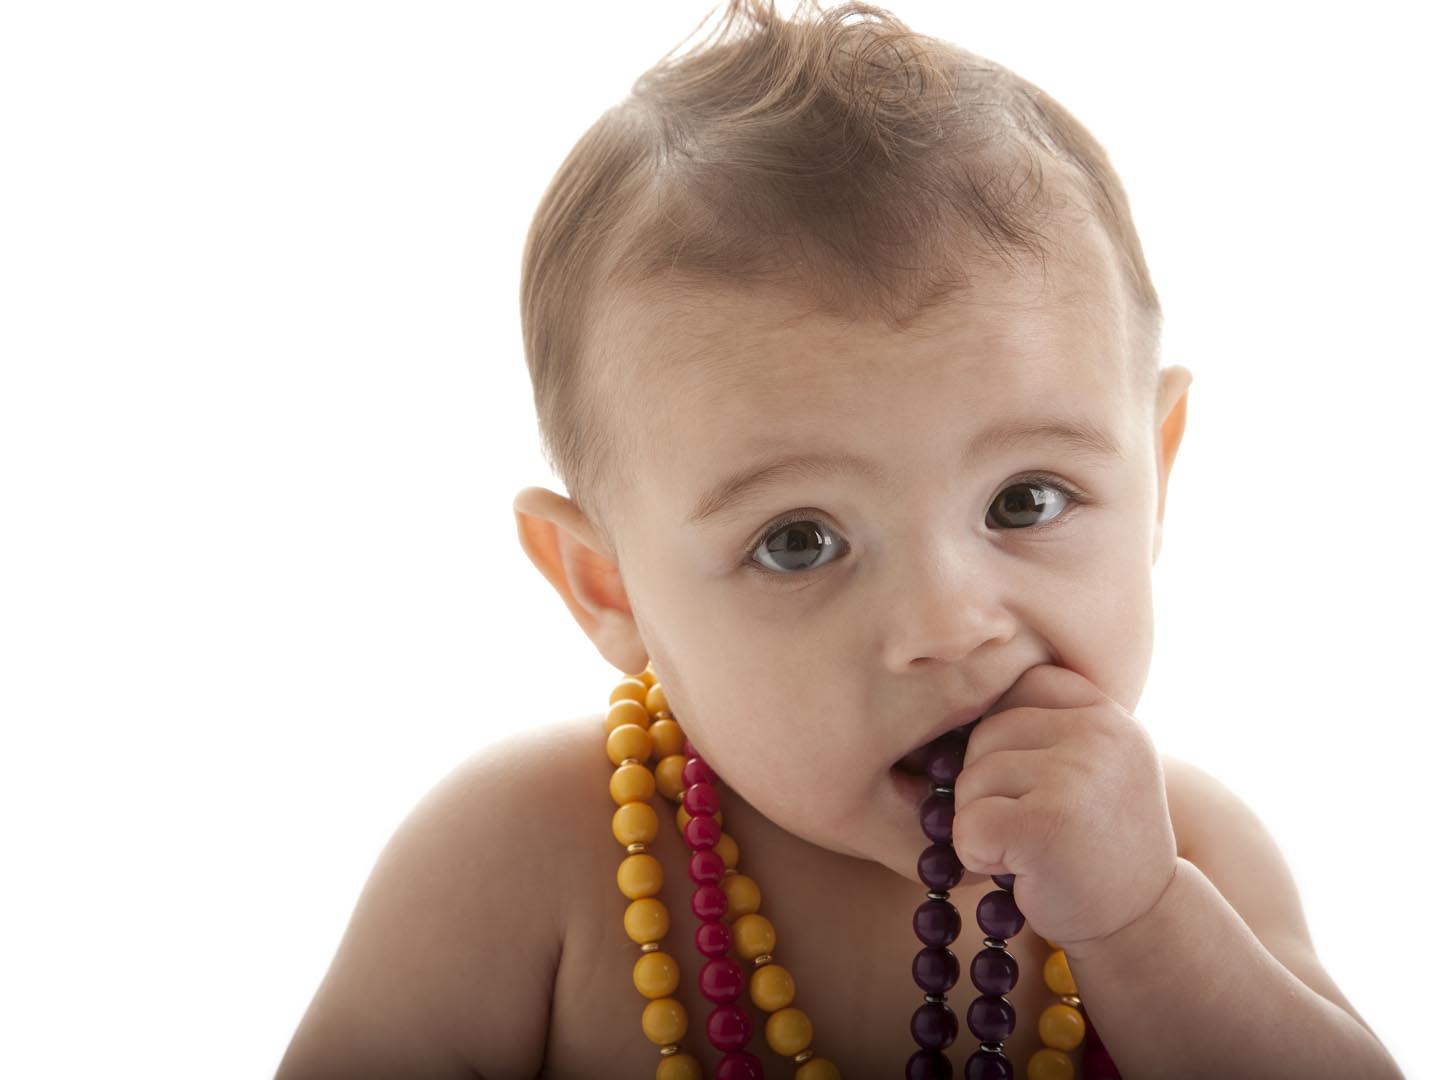 teething necklace